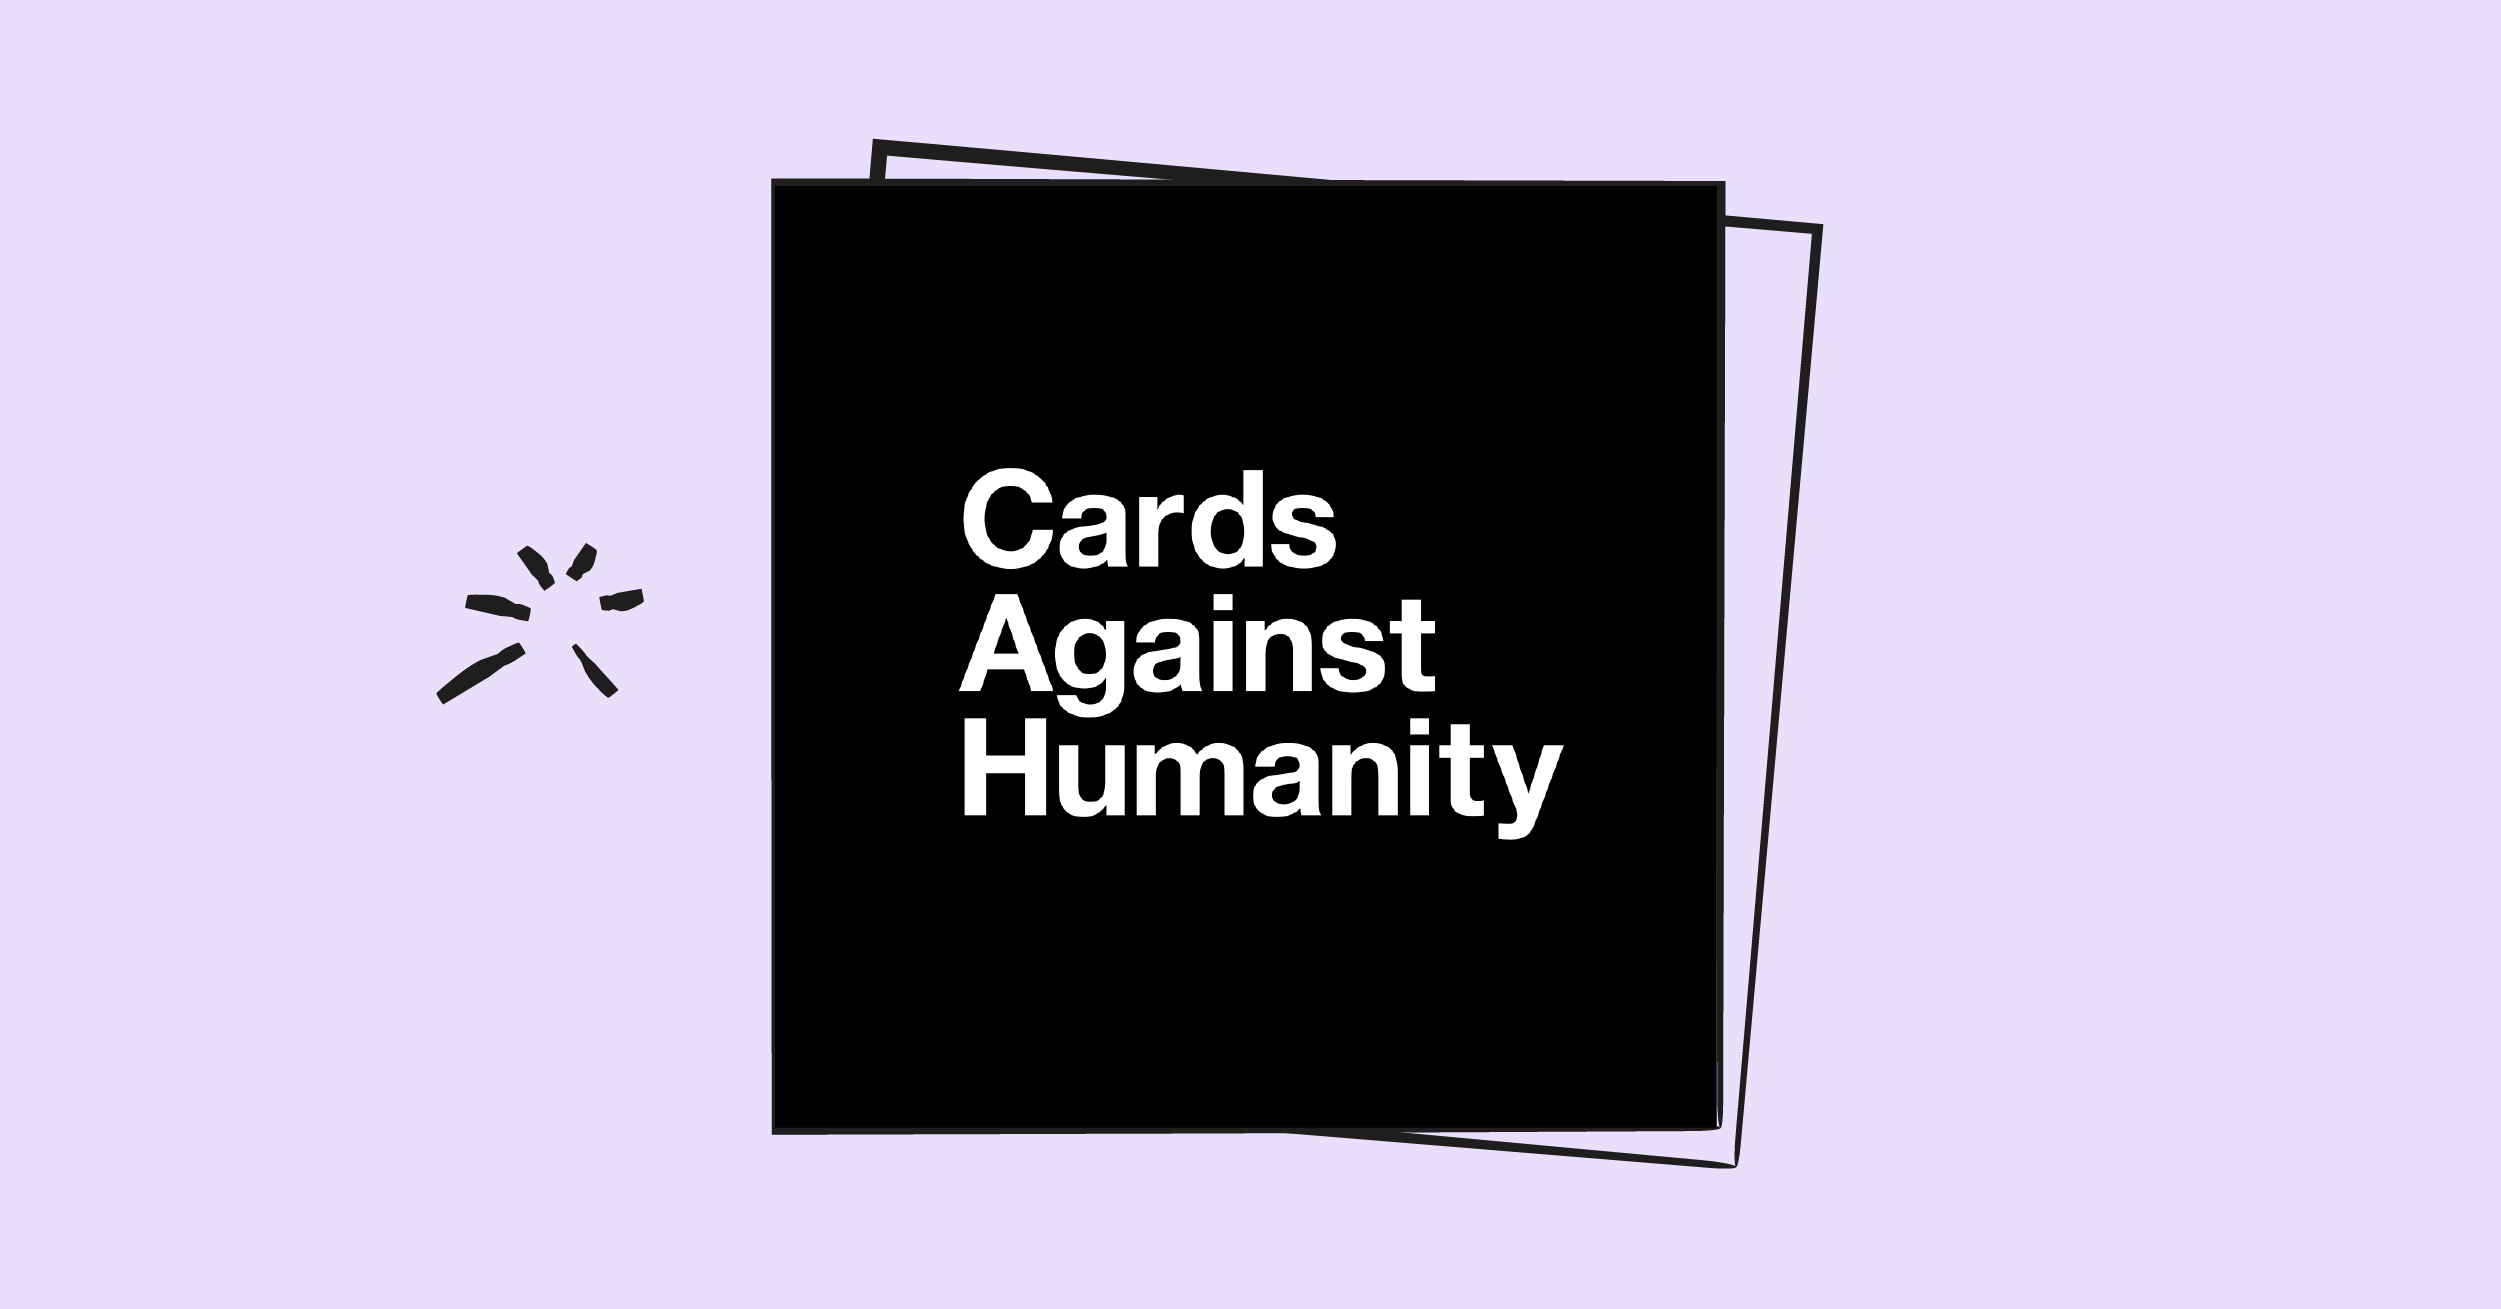 cards against humanity logo on purple background